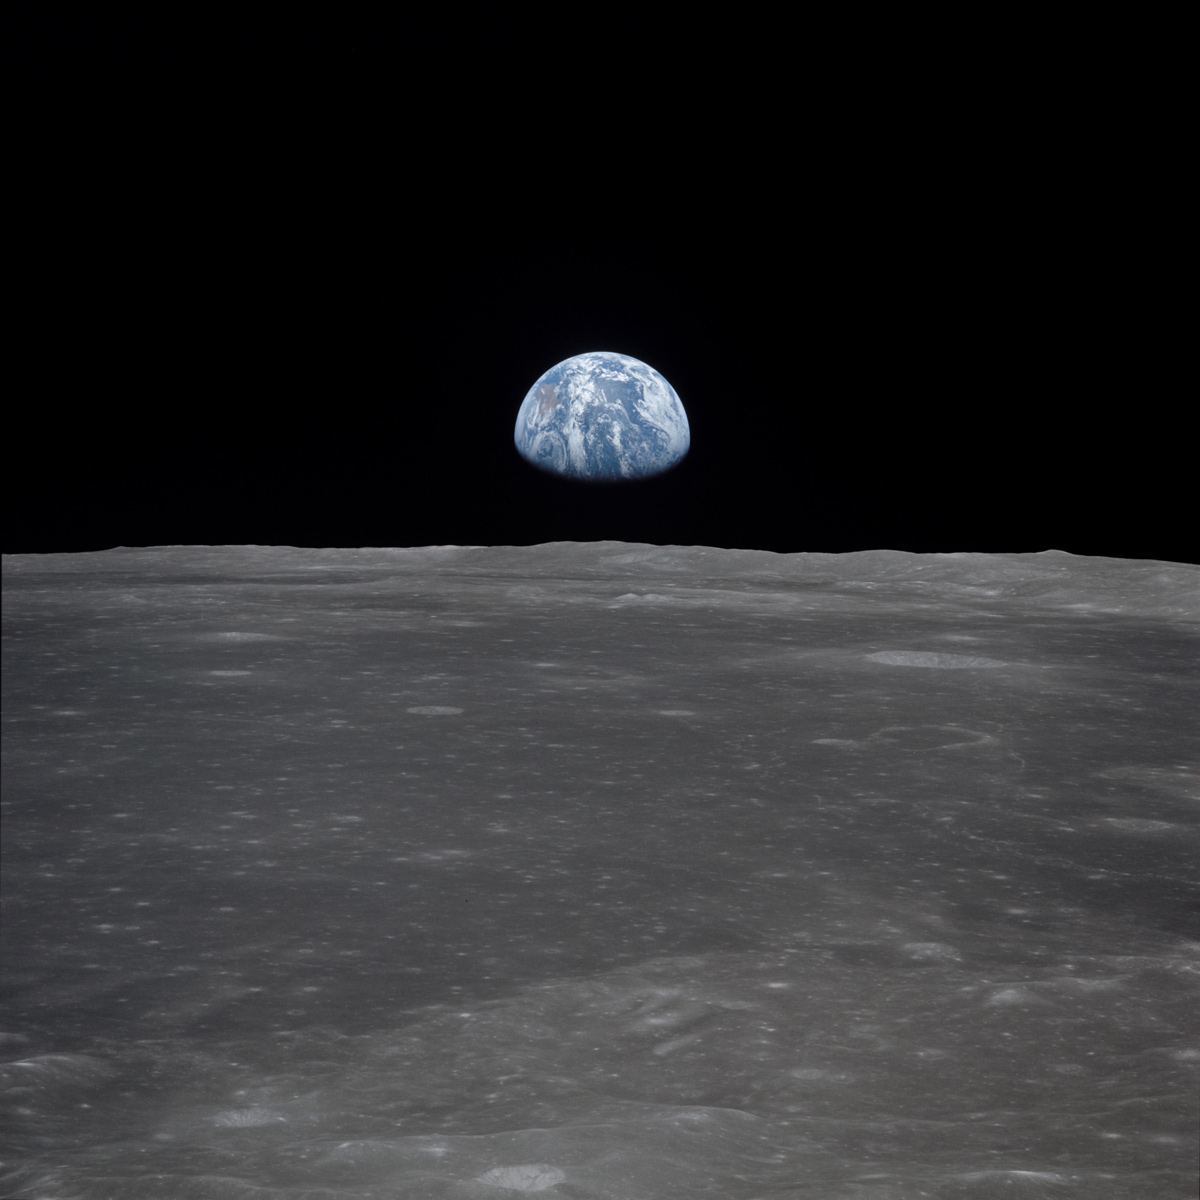 Apollo 11 Mission Image - View of Moon Limb, with Earth on the ...